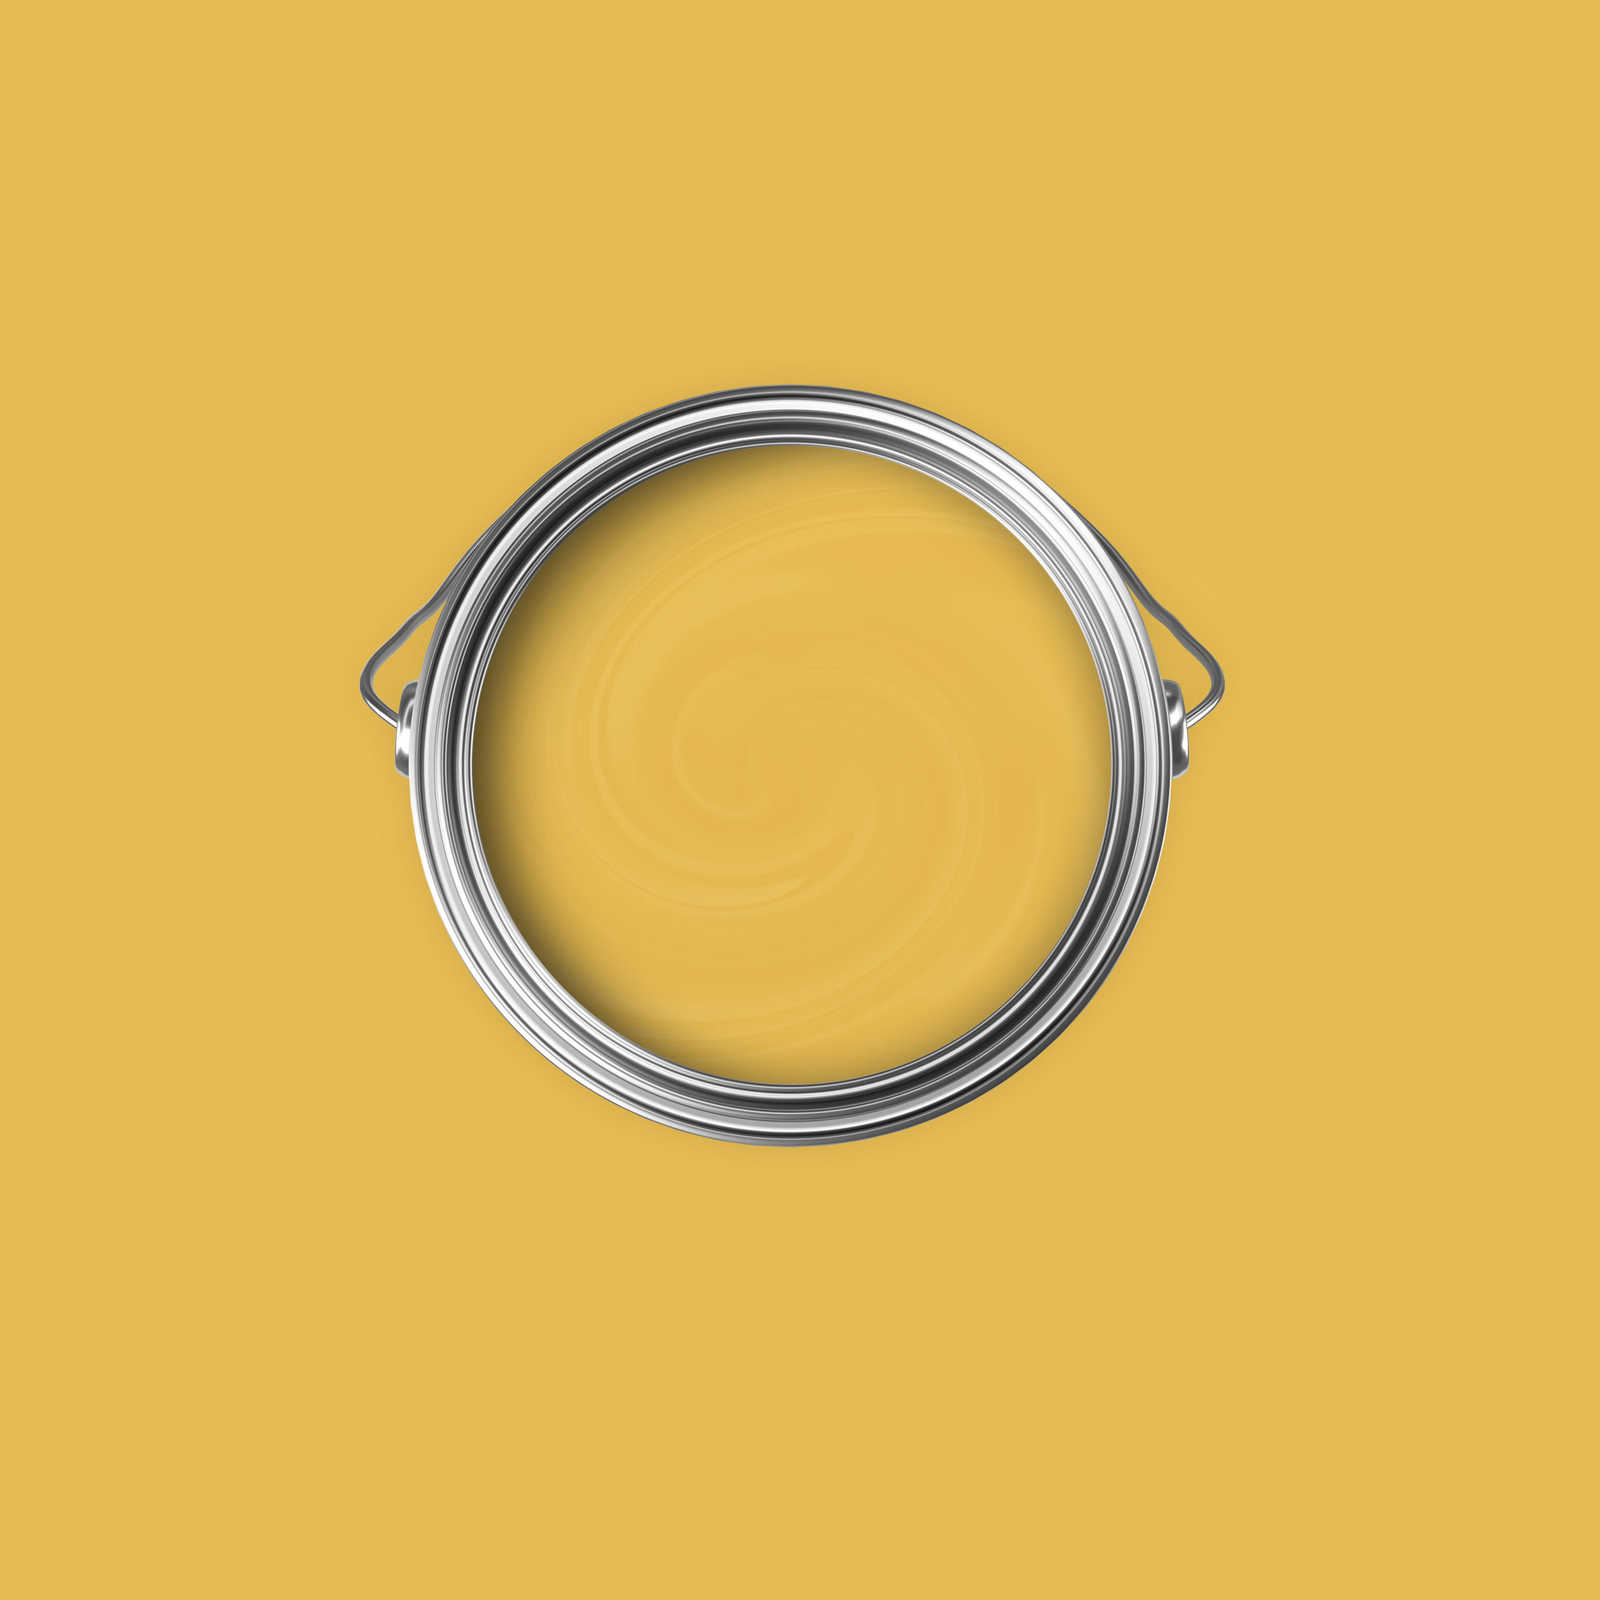             Premium Wall Paint Radiant Mustard Yellow »Juicy Yellow« NW802 – 2.5 litre
        